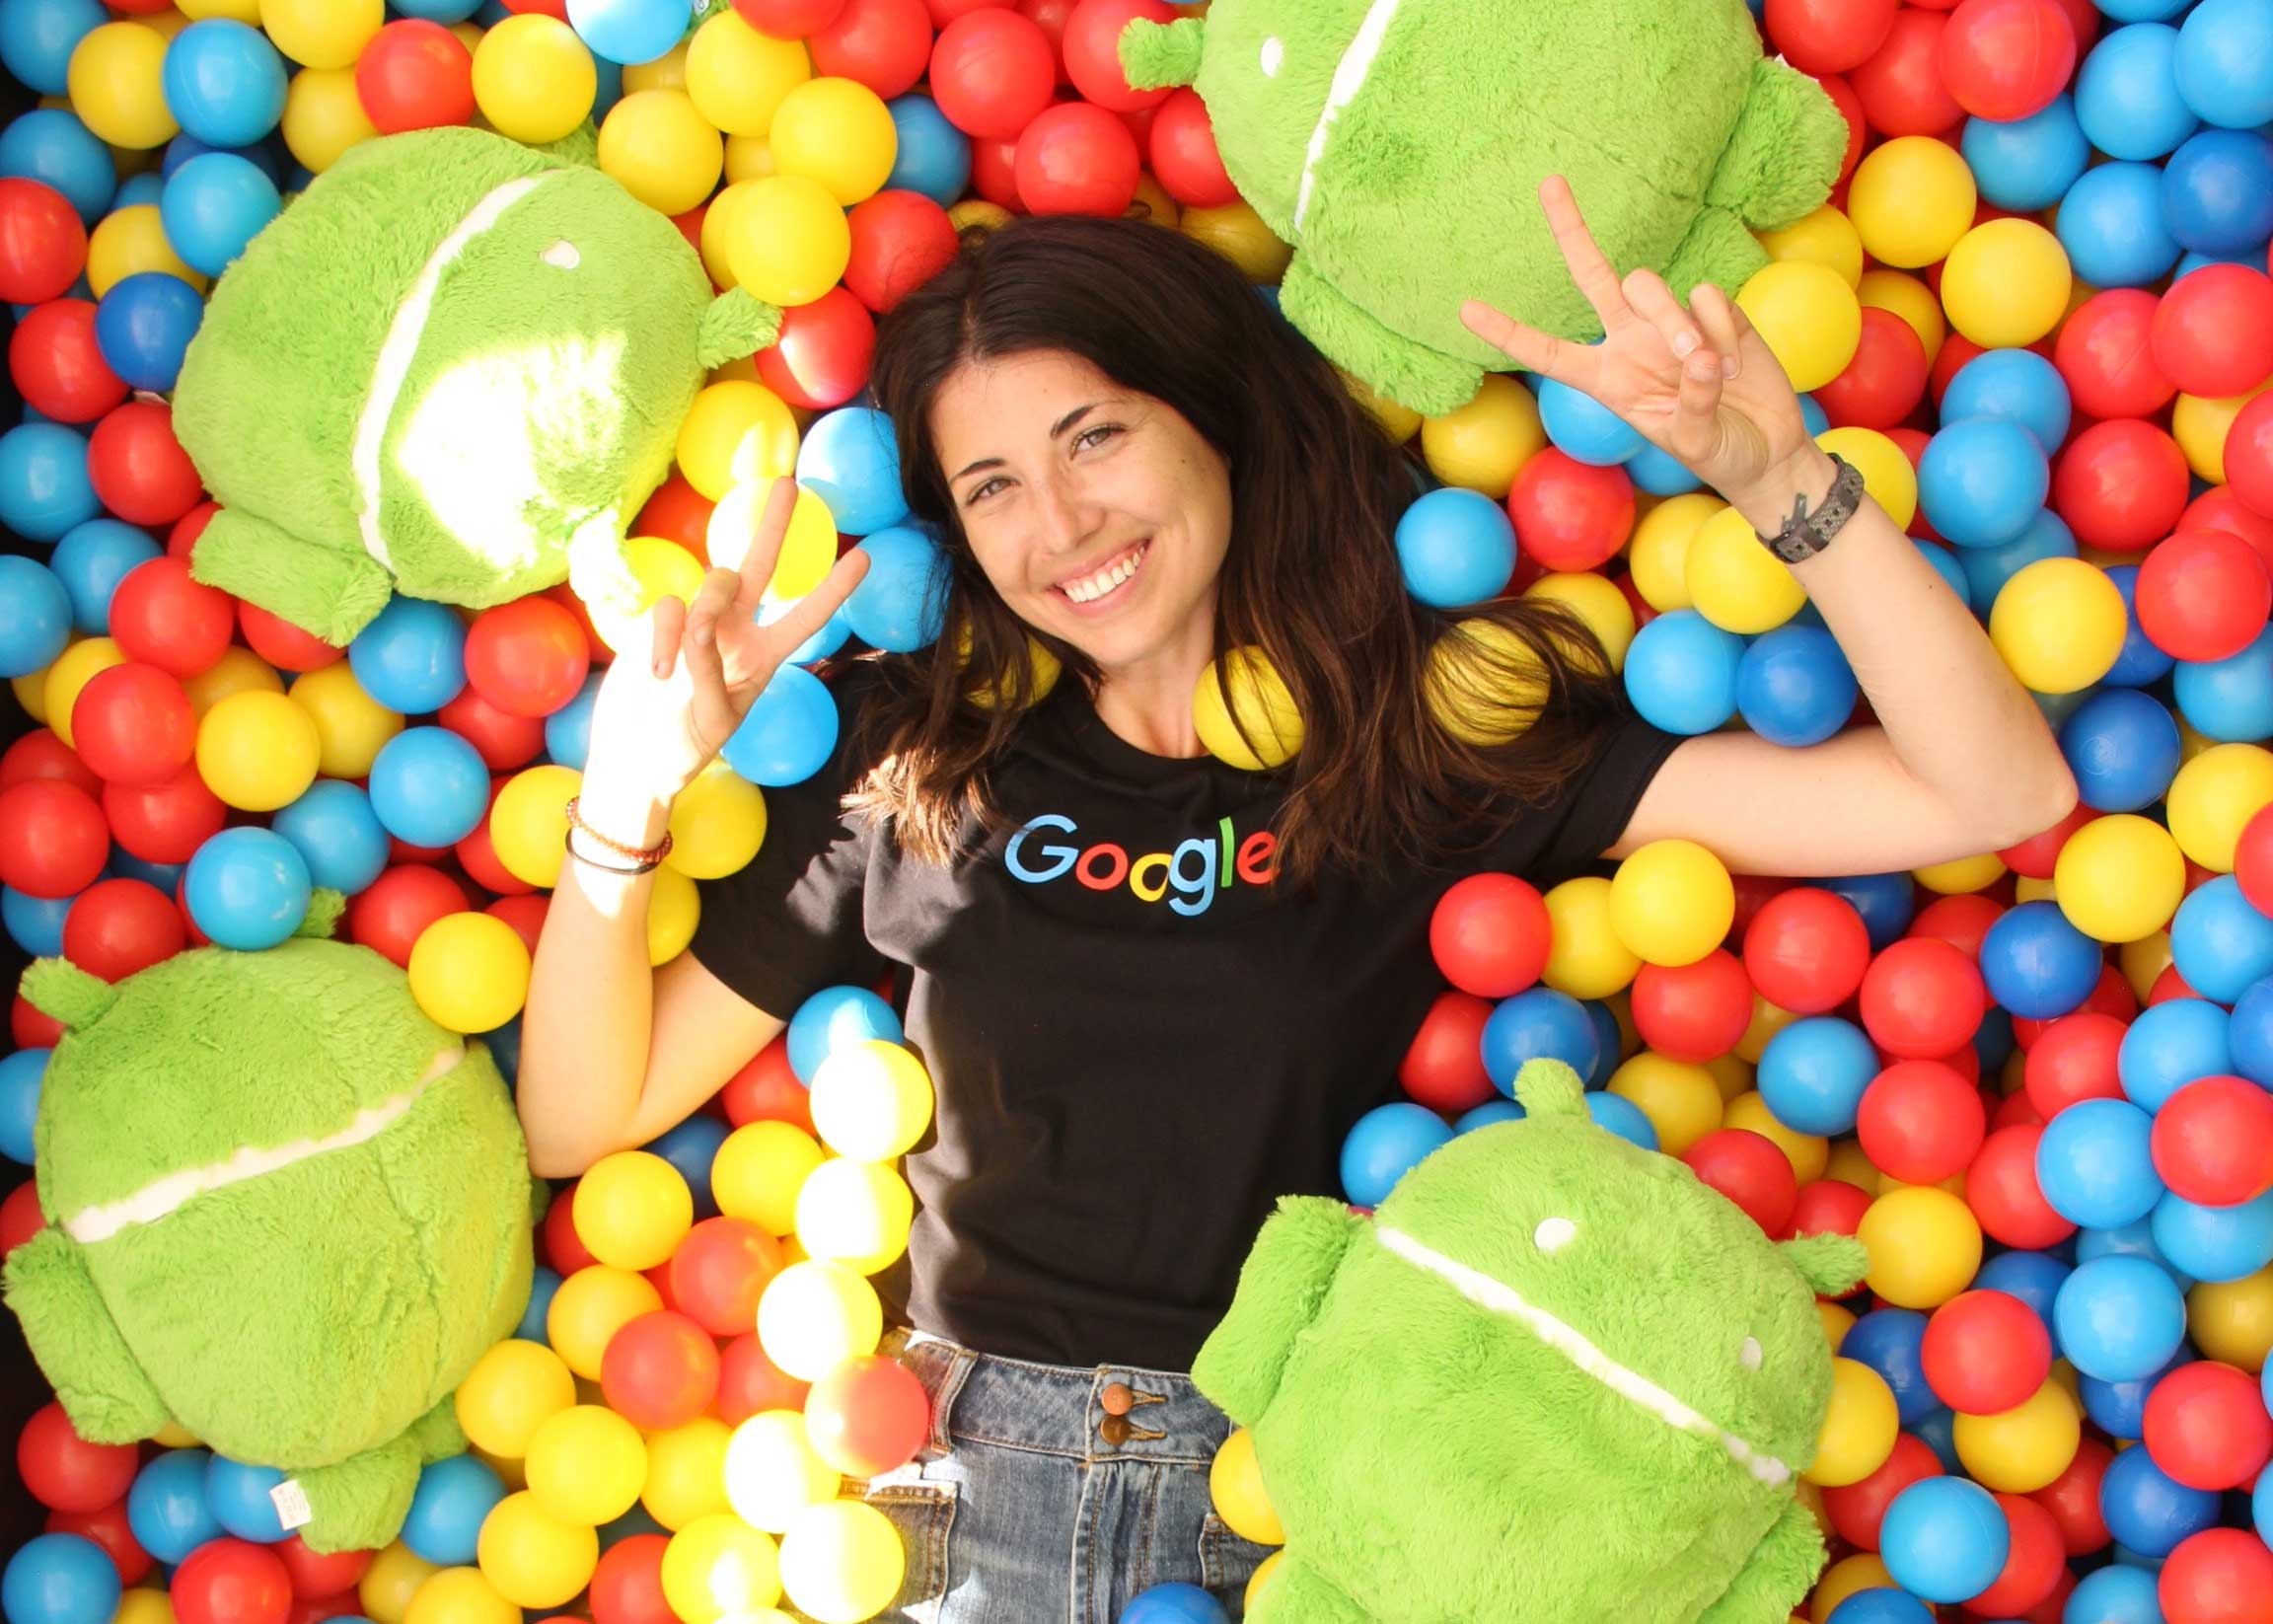 Graduating doctoral student, Jeri Sasser, holds two peace signs up with her hands while wearing a Google shirt against a Google-branded background.